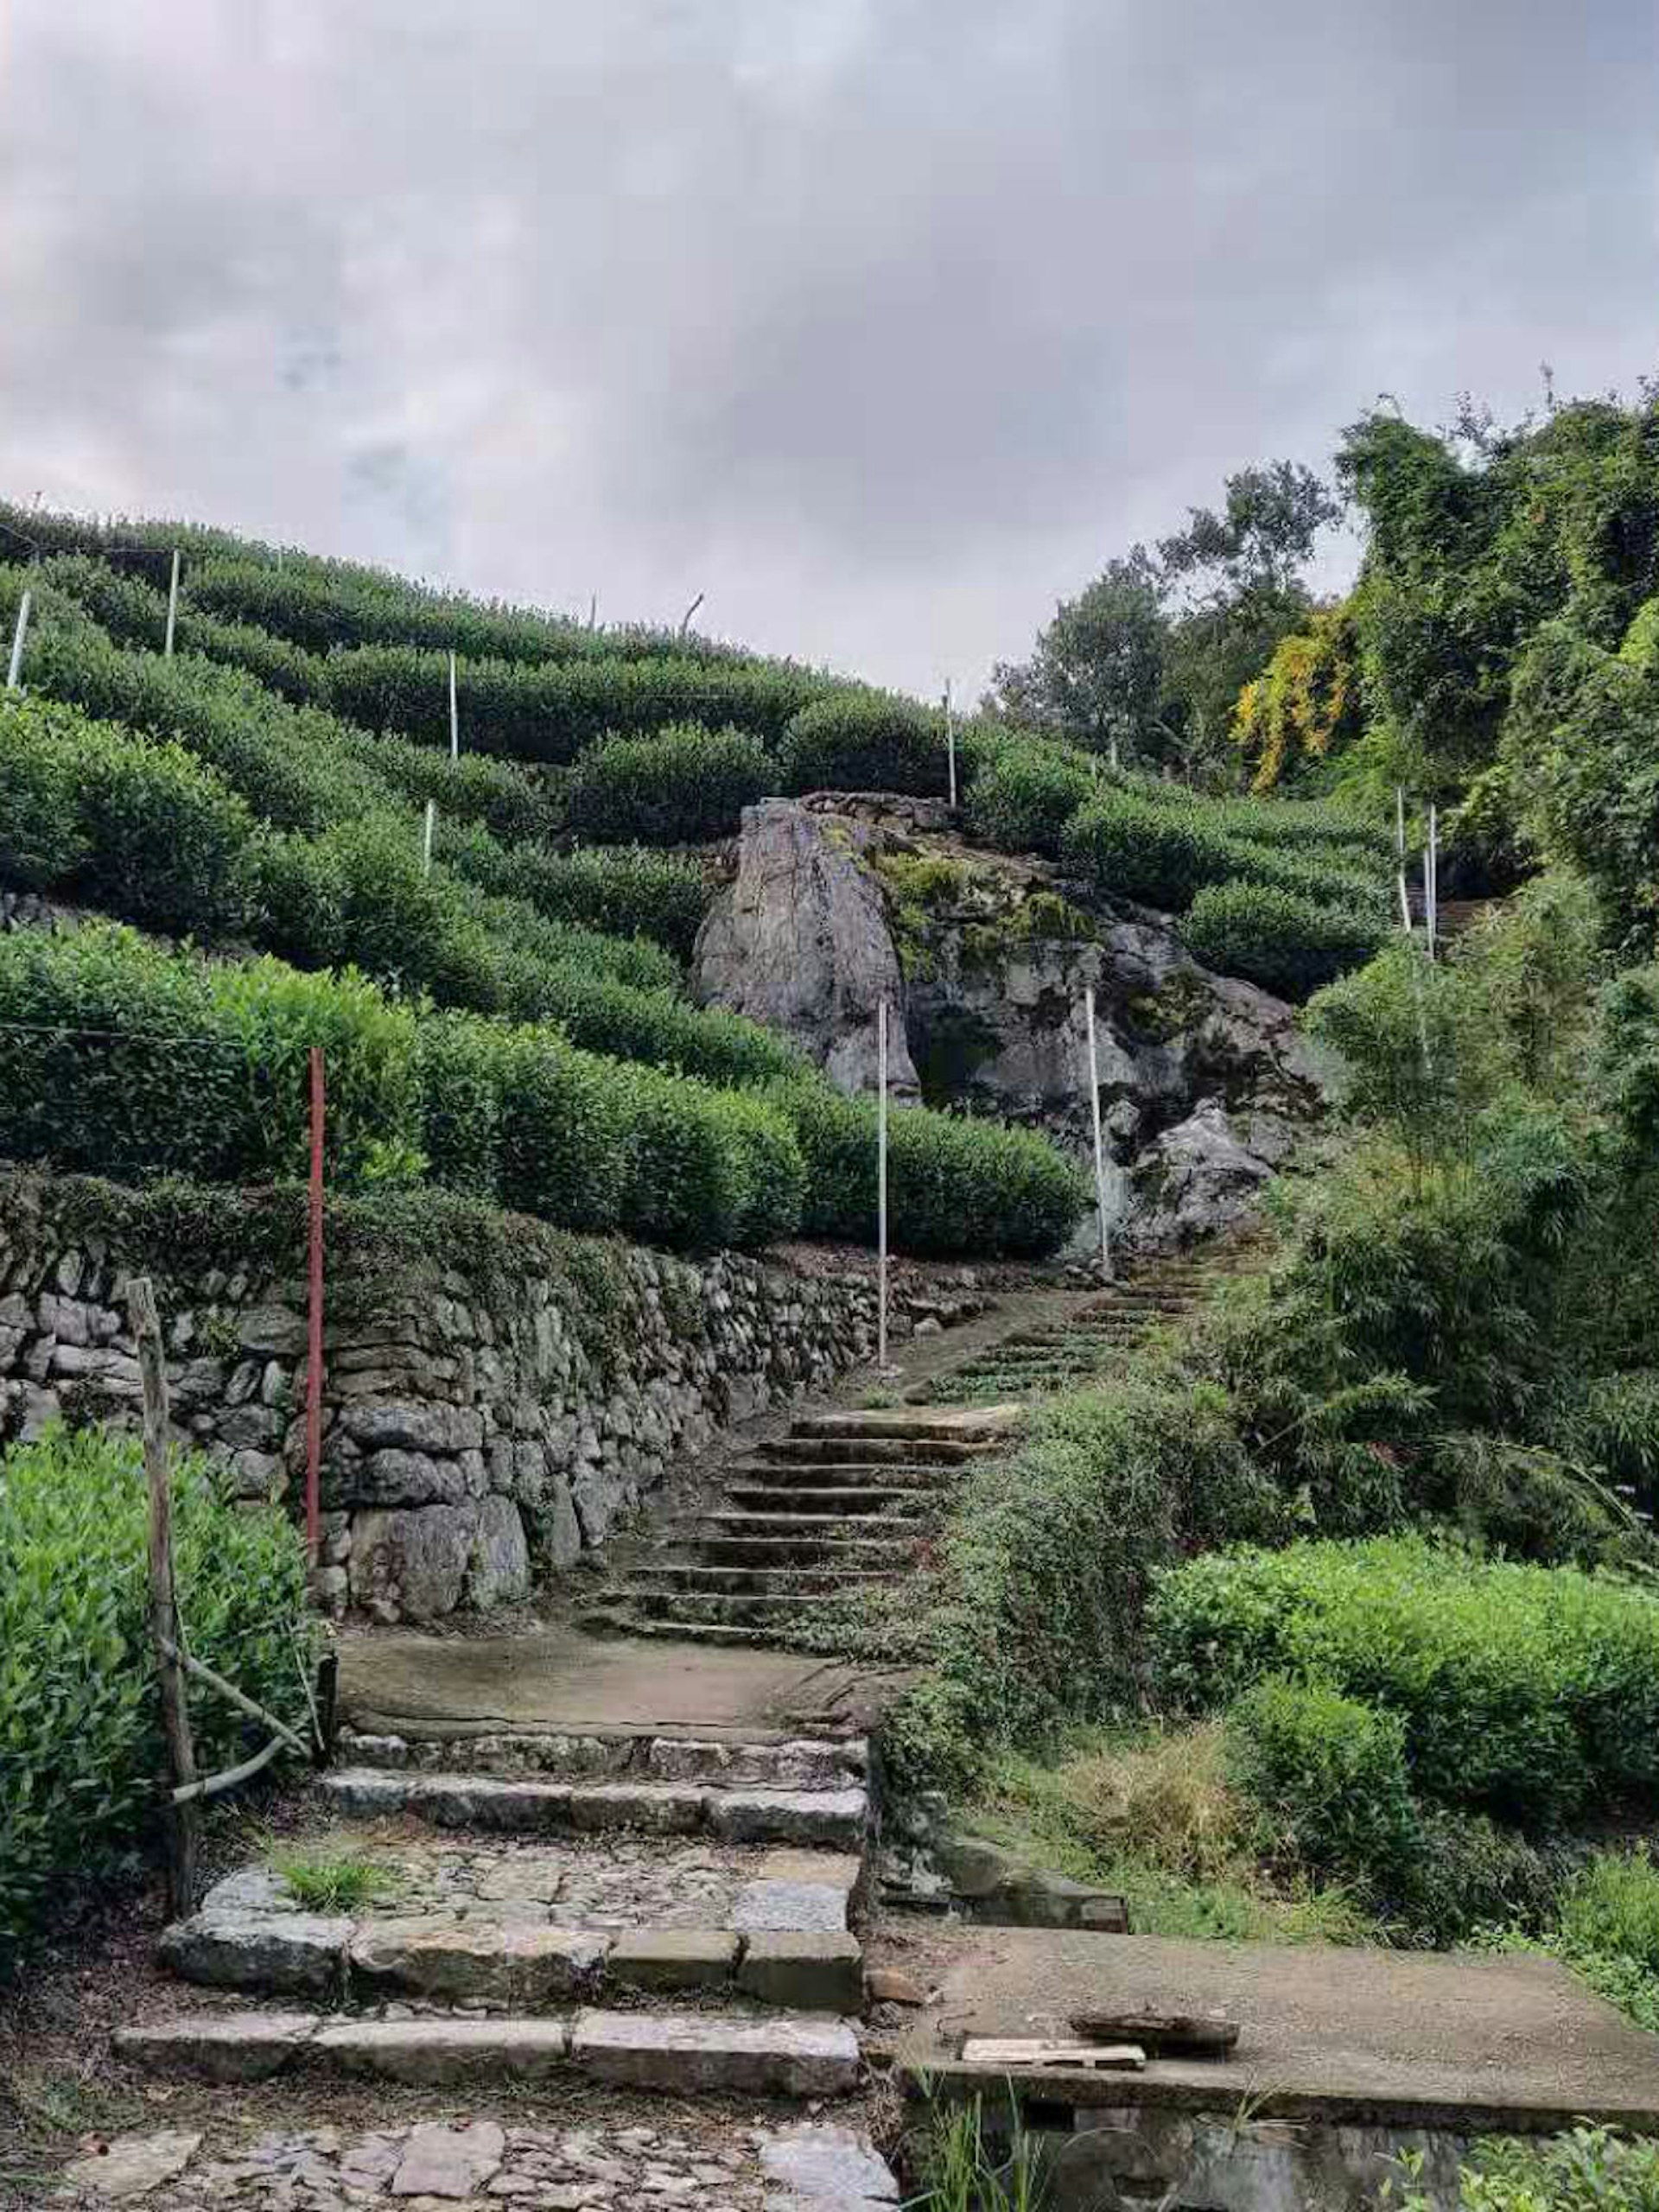 A stone walking path leads up steps with green tea bushes on either side